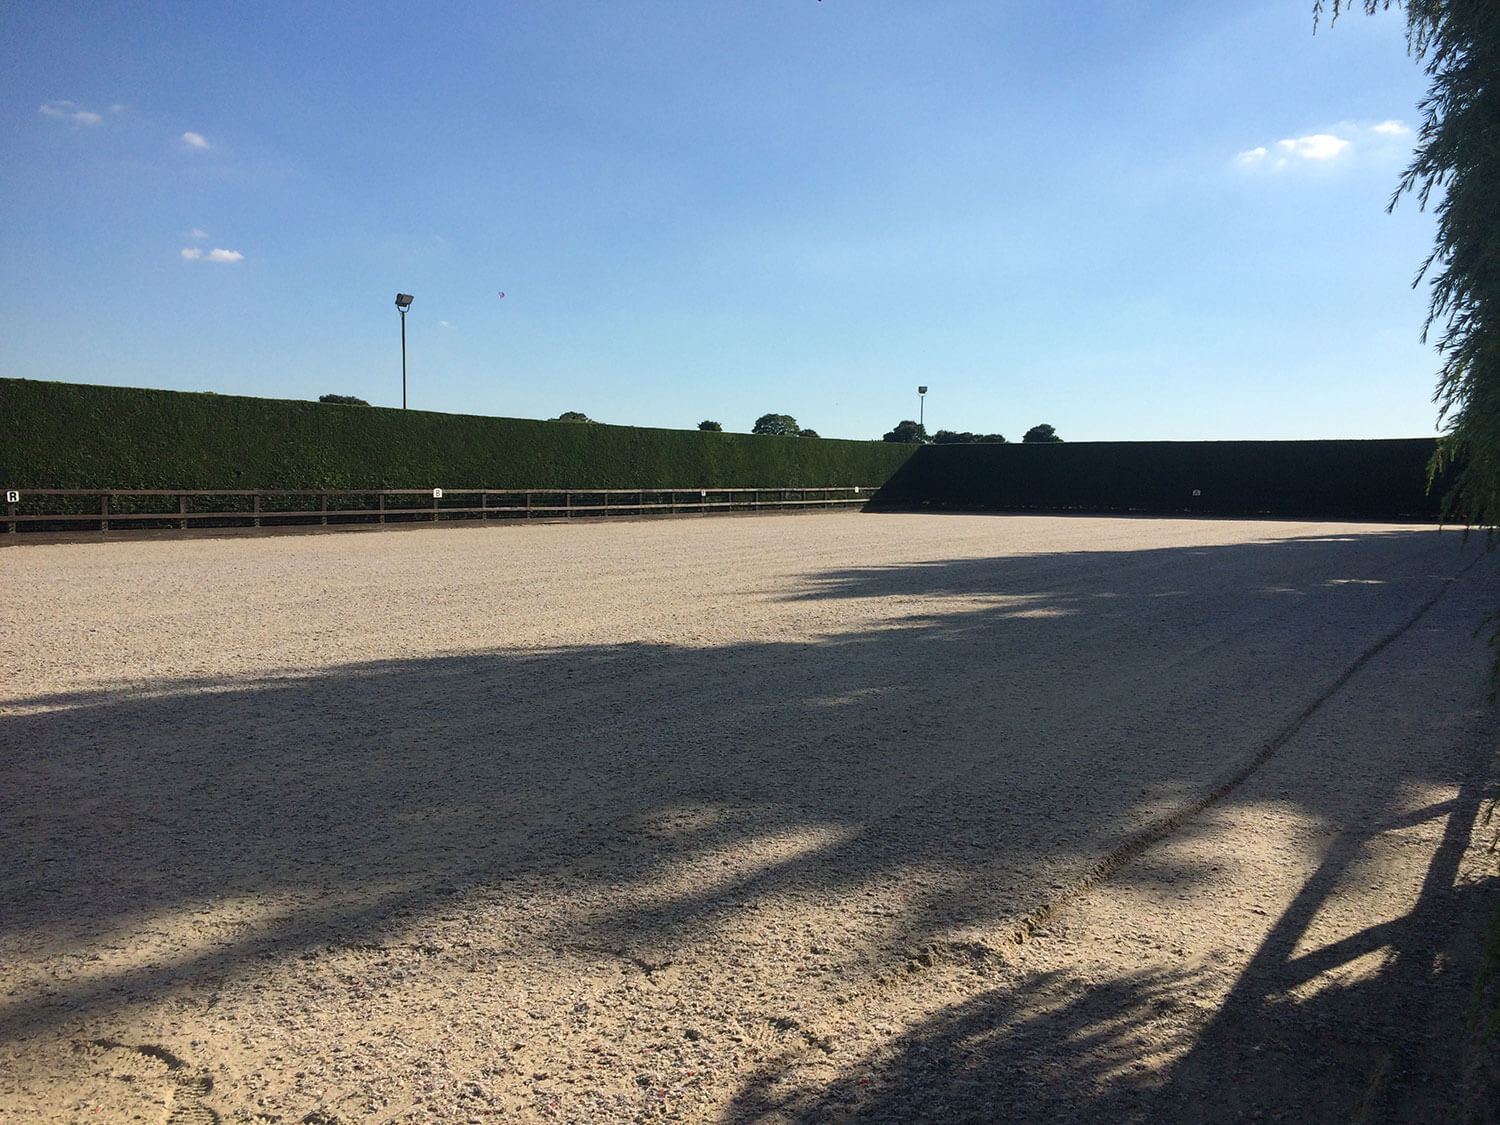 Our spacious riding arena is another stand out feature in our 5* horse facilities here at Martin’s Farm